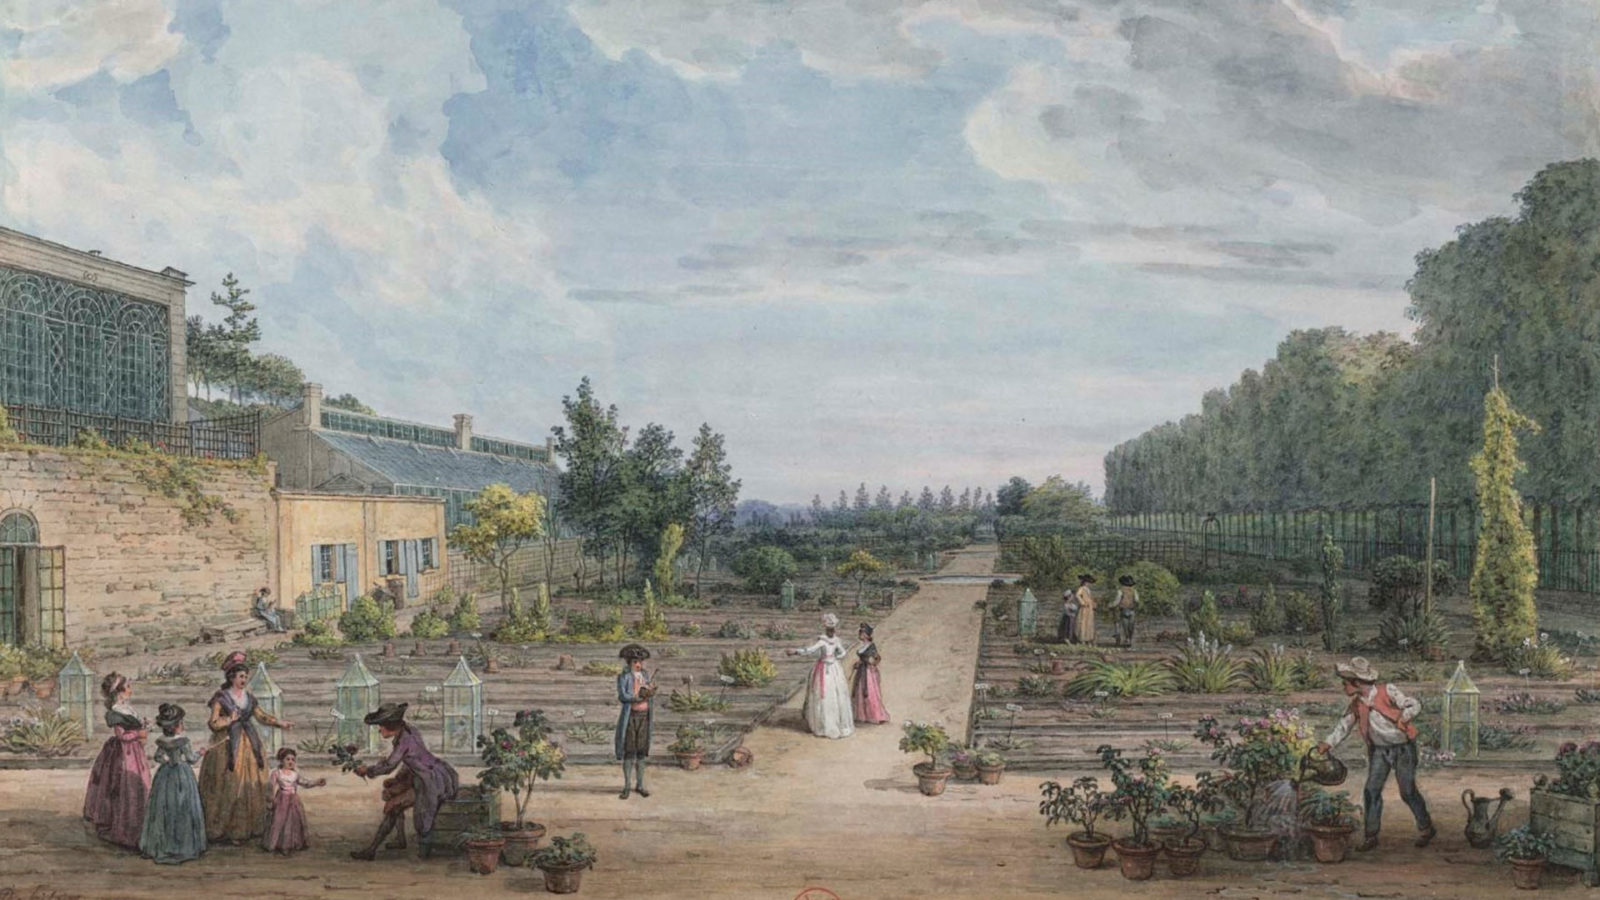 Jean-Baptiste Hilair sketches visitors and gardeners in the Vegetable Garden in the Jardin des Plantes.